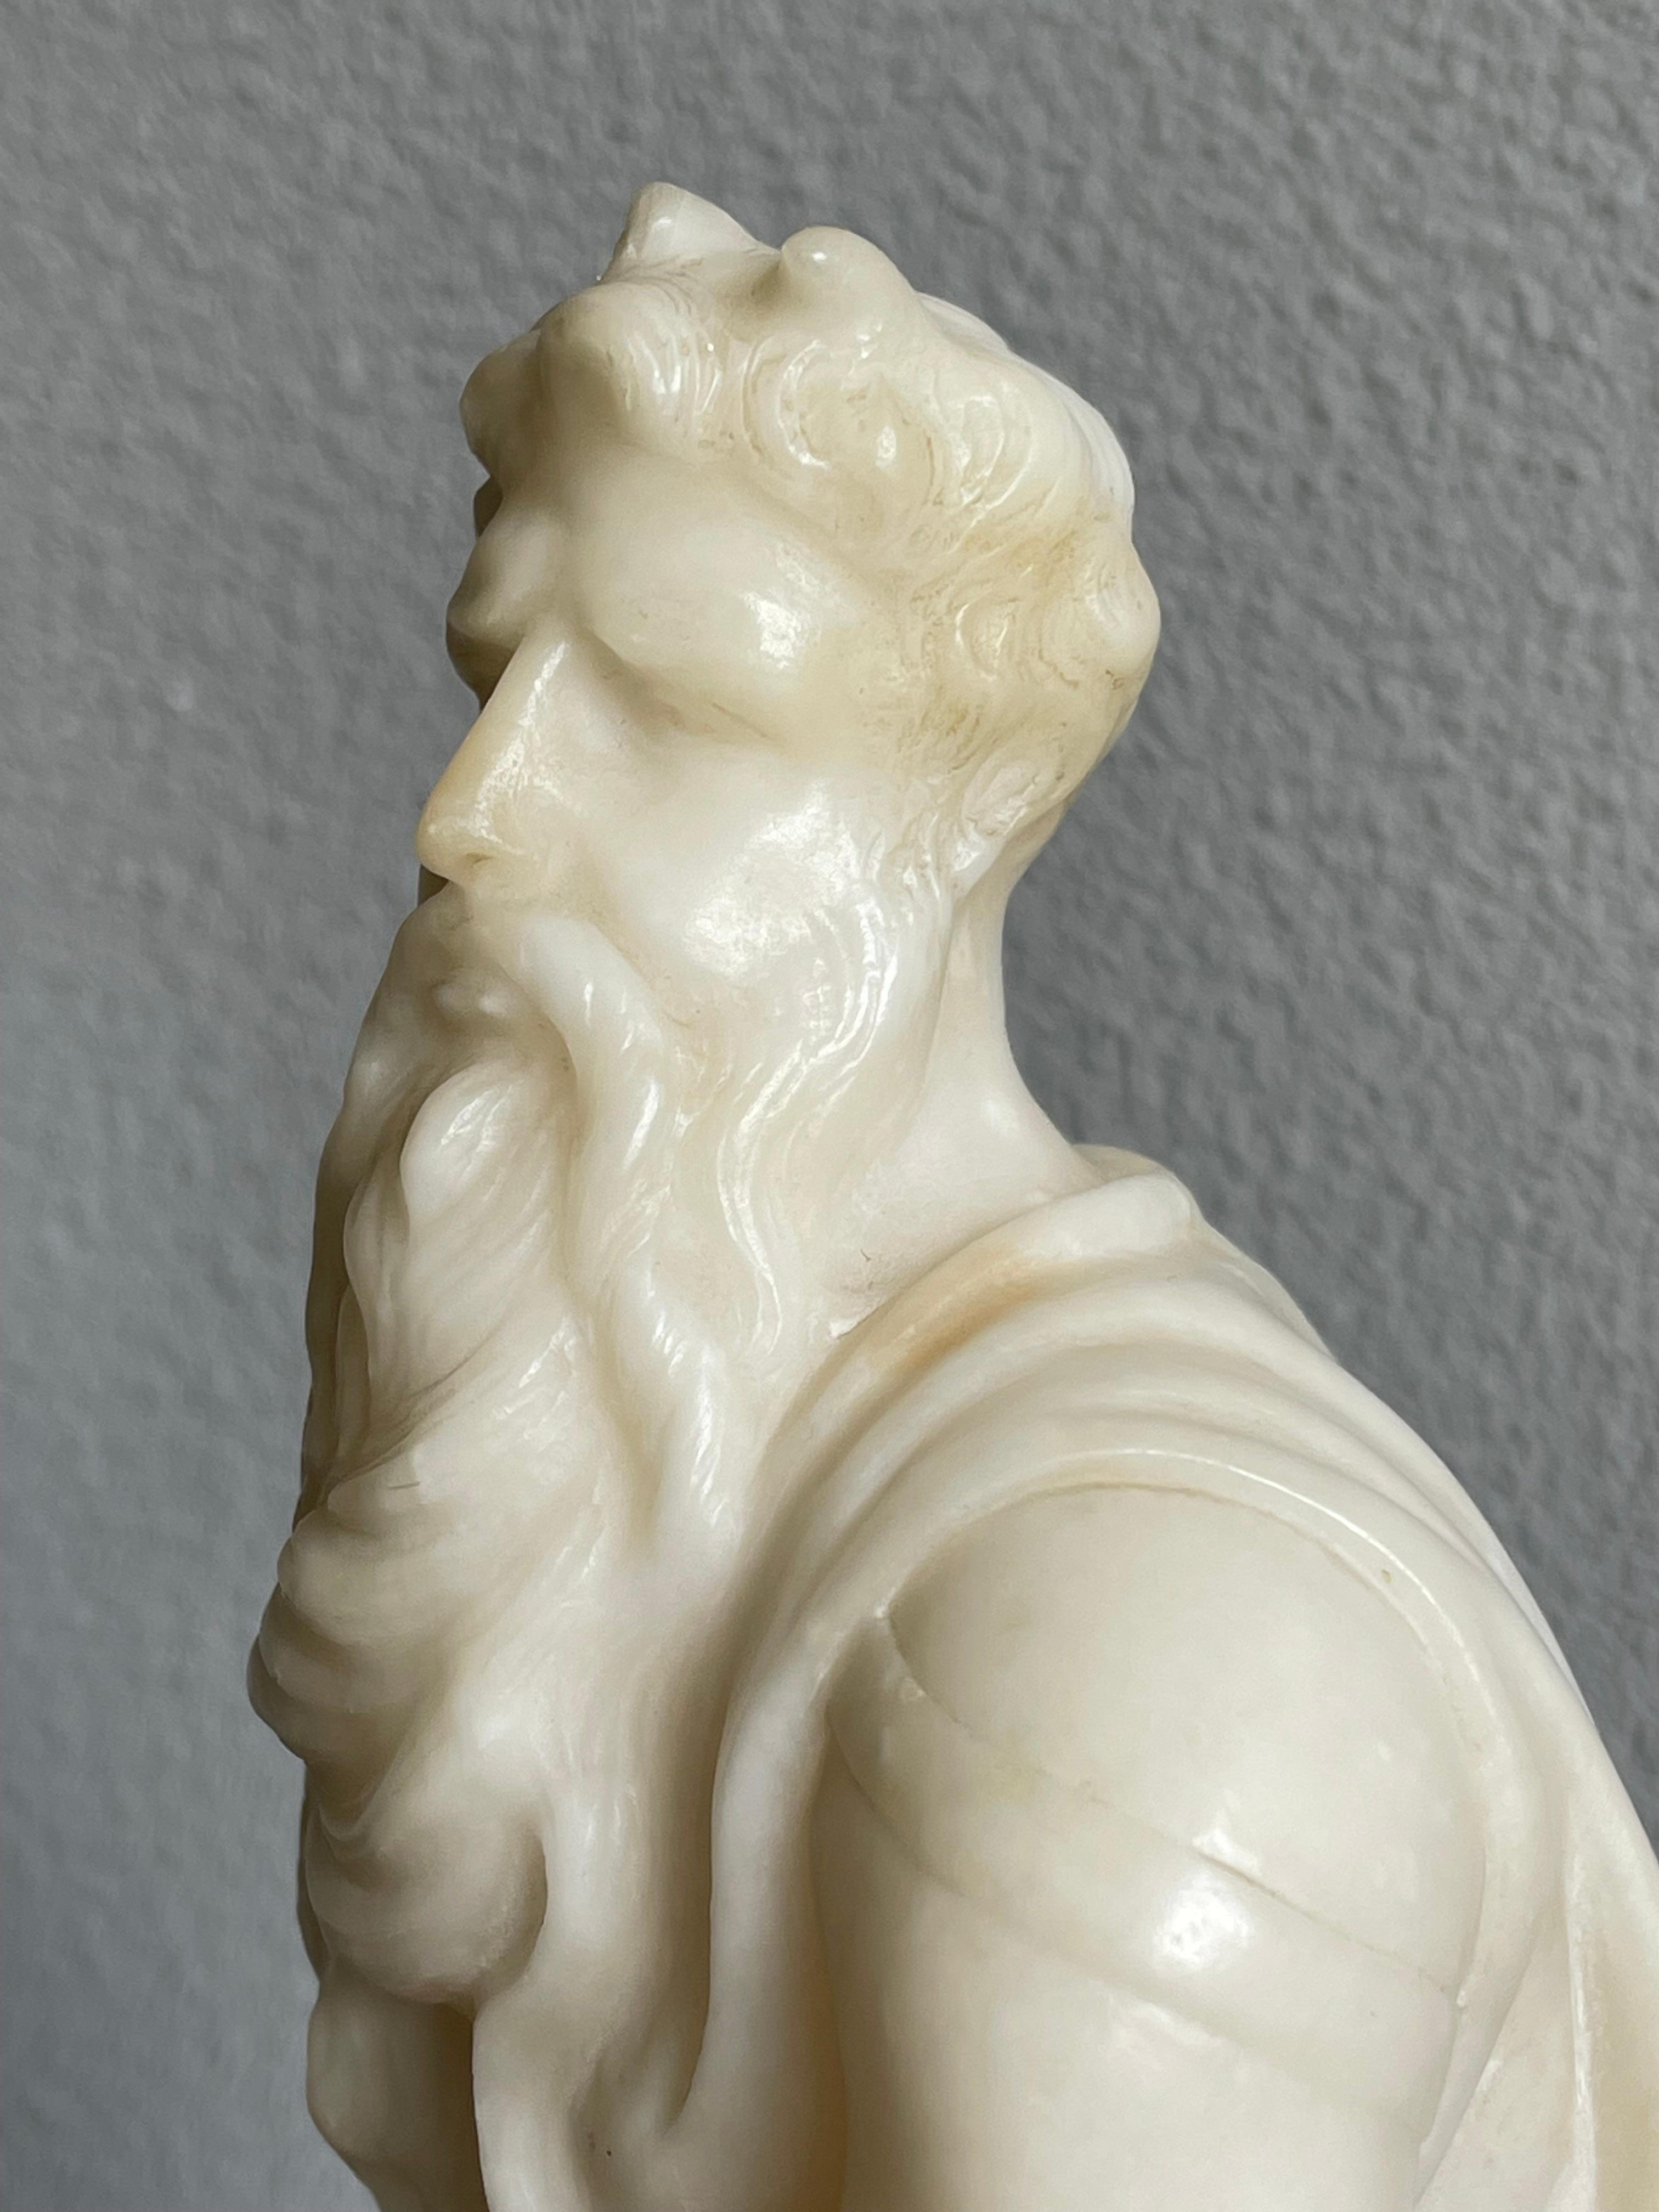 Top quality carved antique Moses sculpture after the original marble Moses by Michelangelo. 

If you are a collector of rare and top-quality made, biblical antiques then this hand carved grand tour sculpture could be yours to own and enjoy soon.